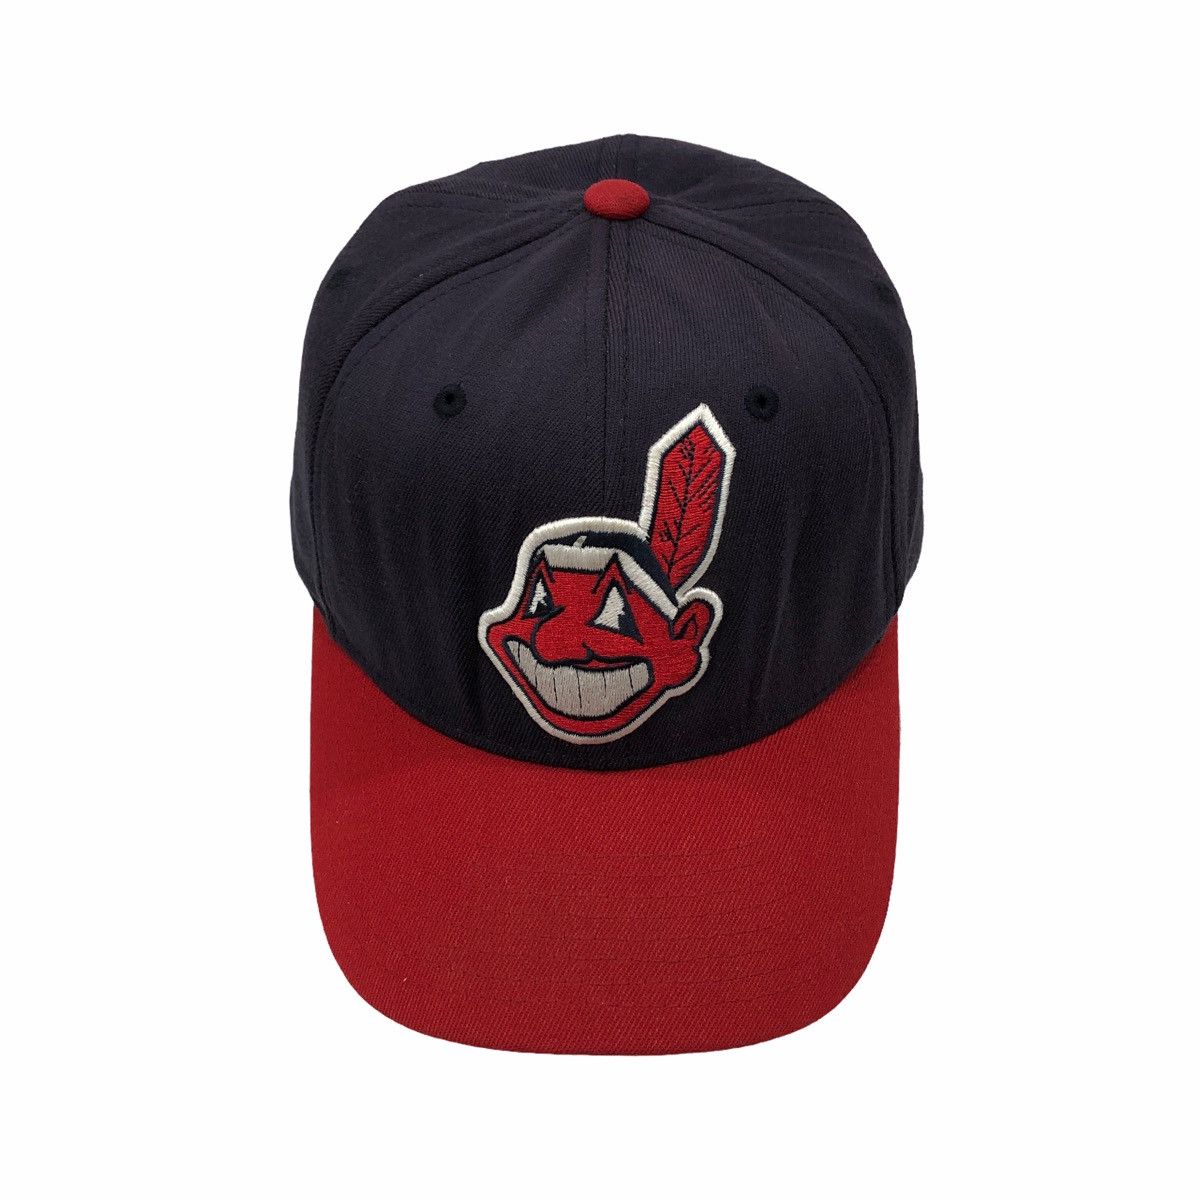 New Era, Accessories, Vintage Cleveland Indians Hat Size 7 8 Chief Wahoo  Baseball Cap Game Day Rare